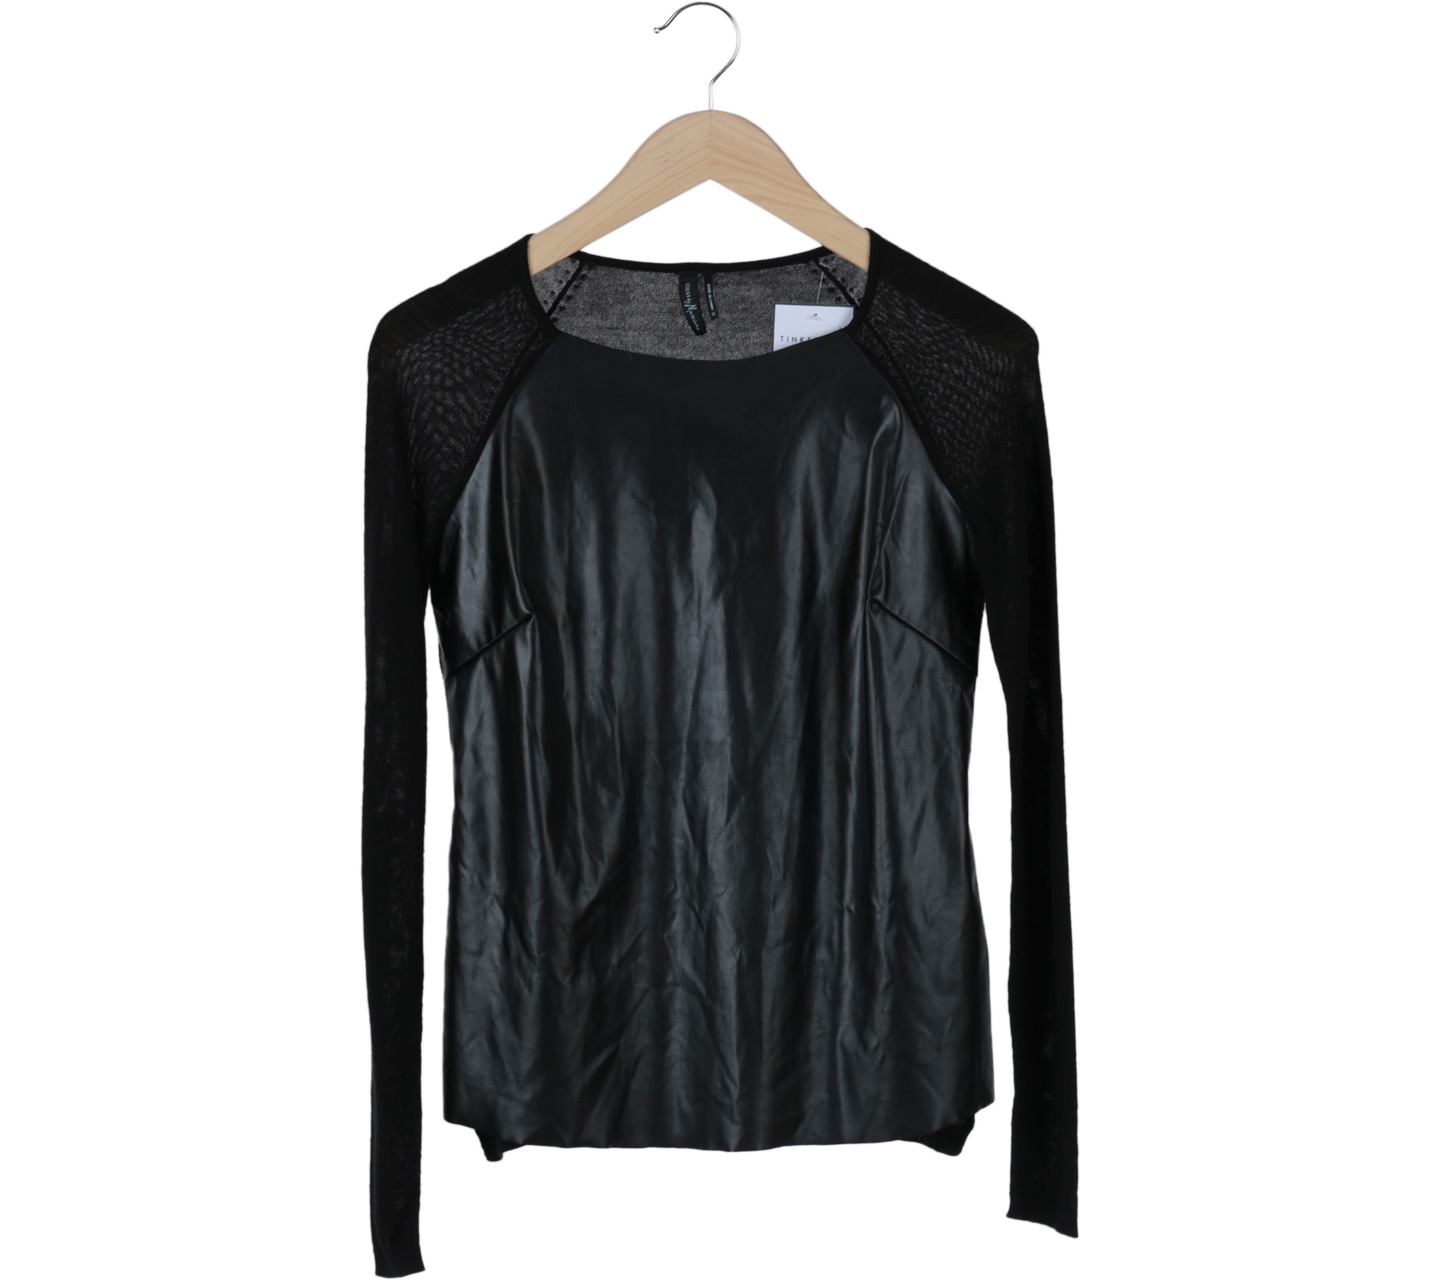 Guess Black Leather Blouse